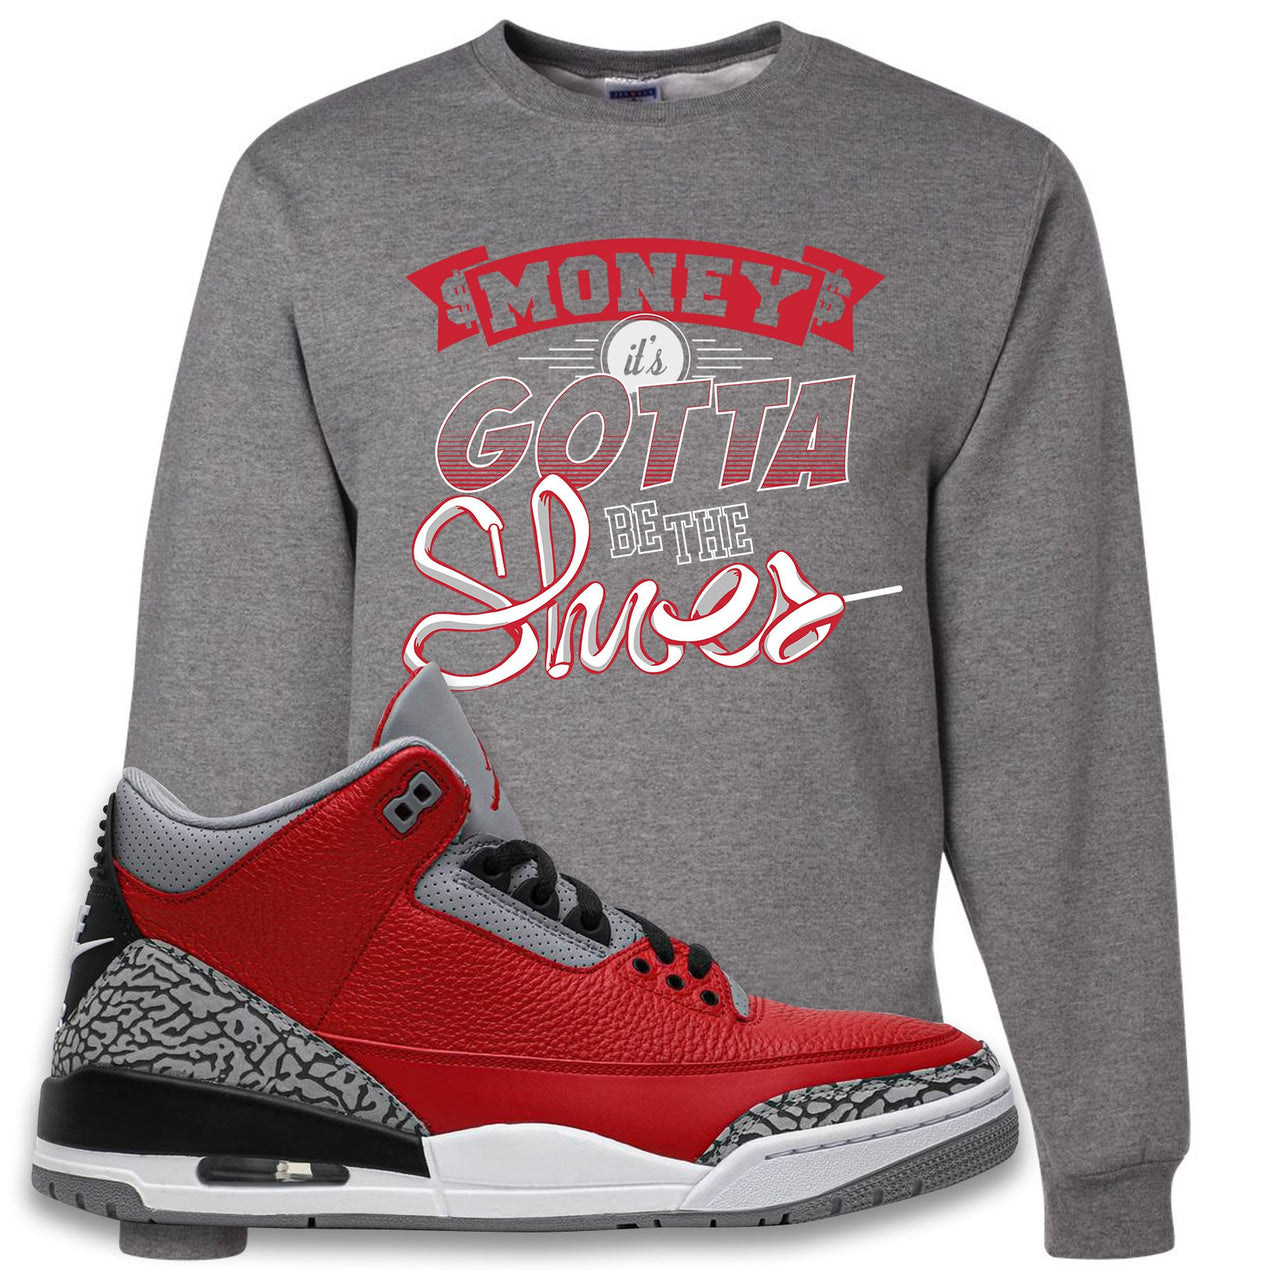 Chicago Exclusive Jordan 3 Red Cement Sneaker Oxford Crewneck Sweatshirt | Crewneck to match Jordan 3 All Star Red Cement Shoes | Money Its The Shoes